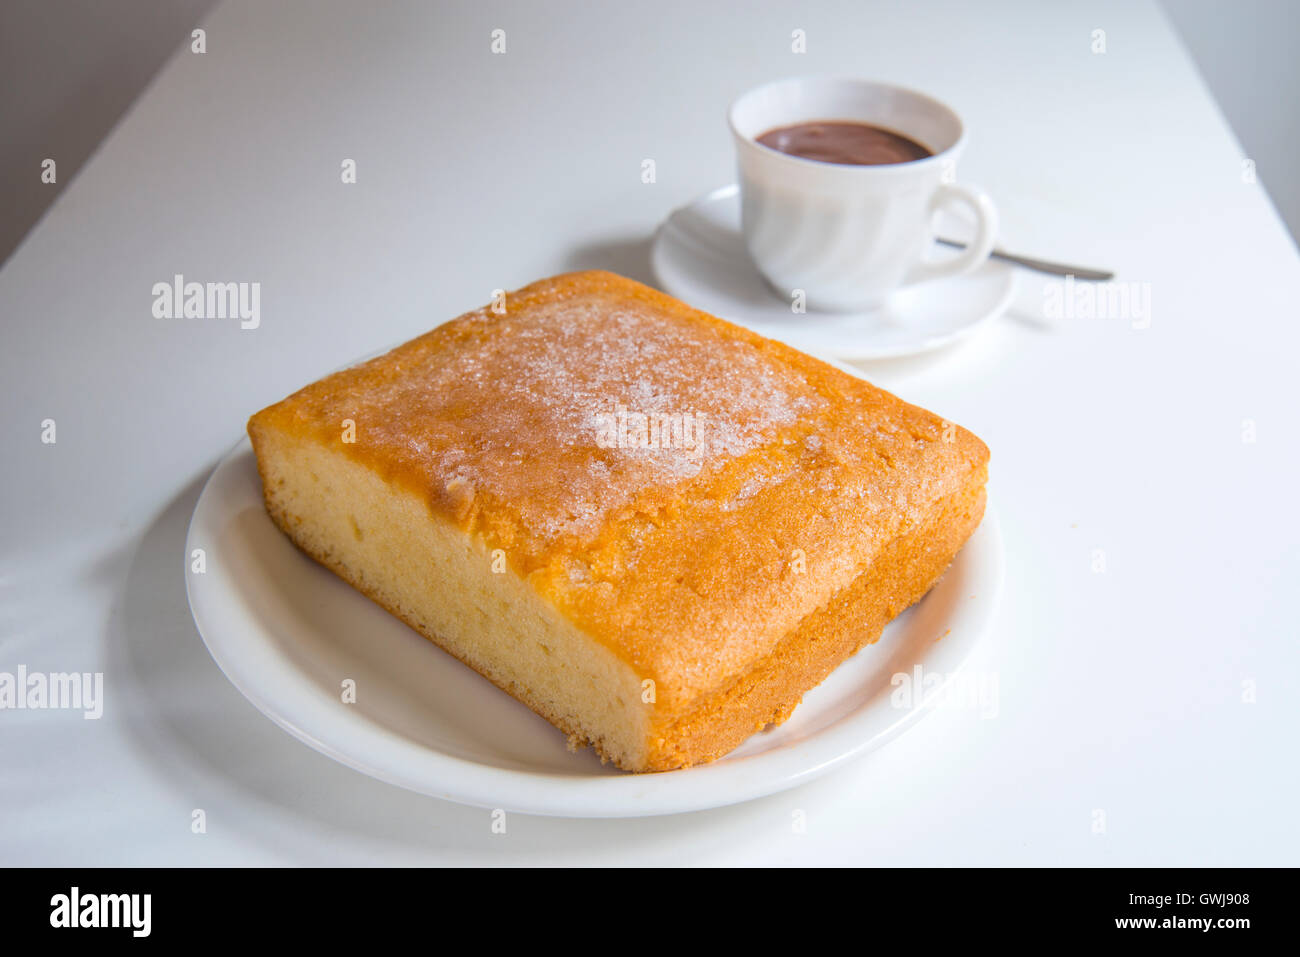 Cake and cup of chocolate for breakfast. Stock Photo